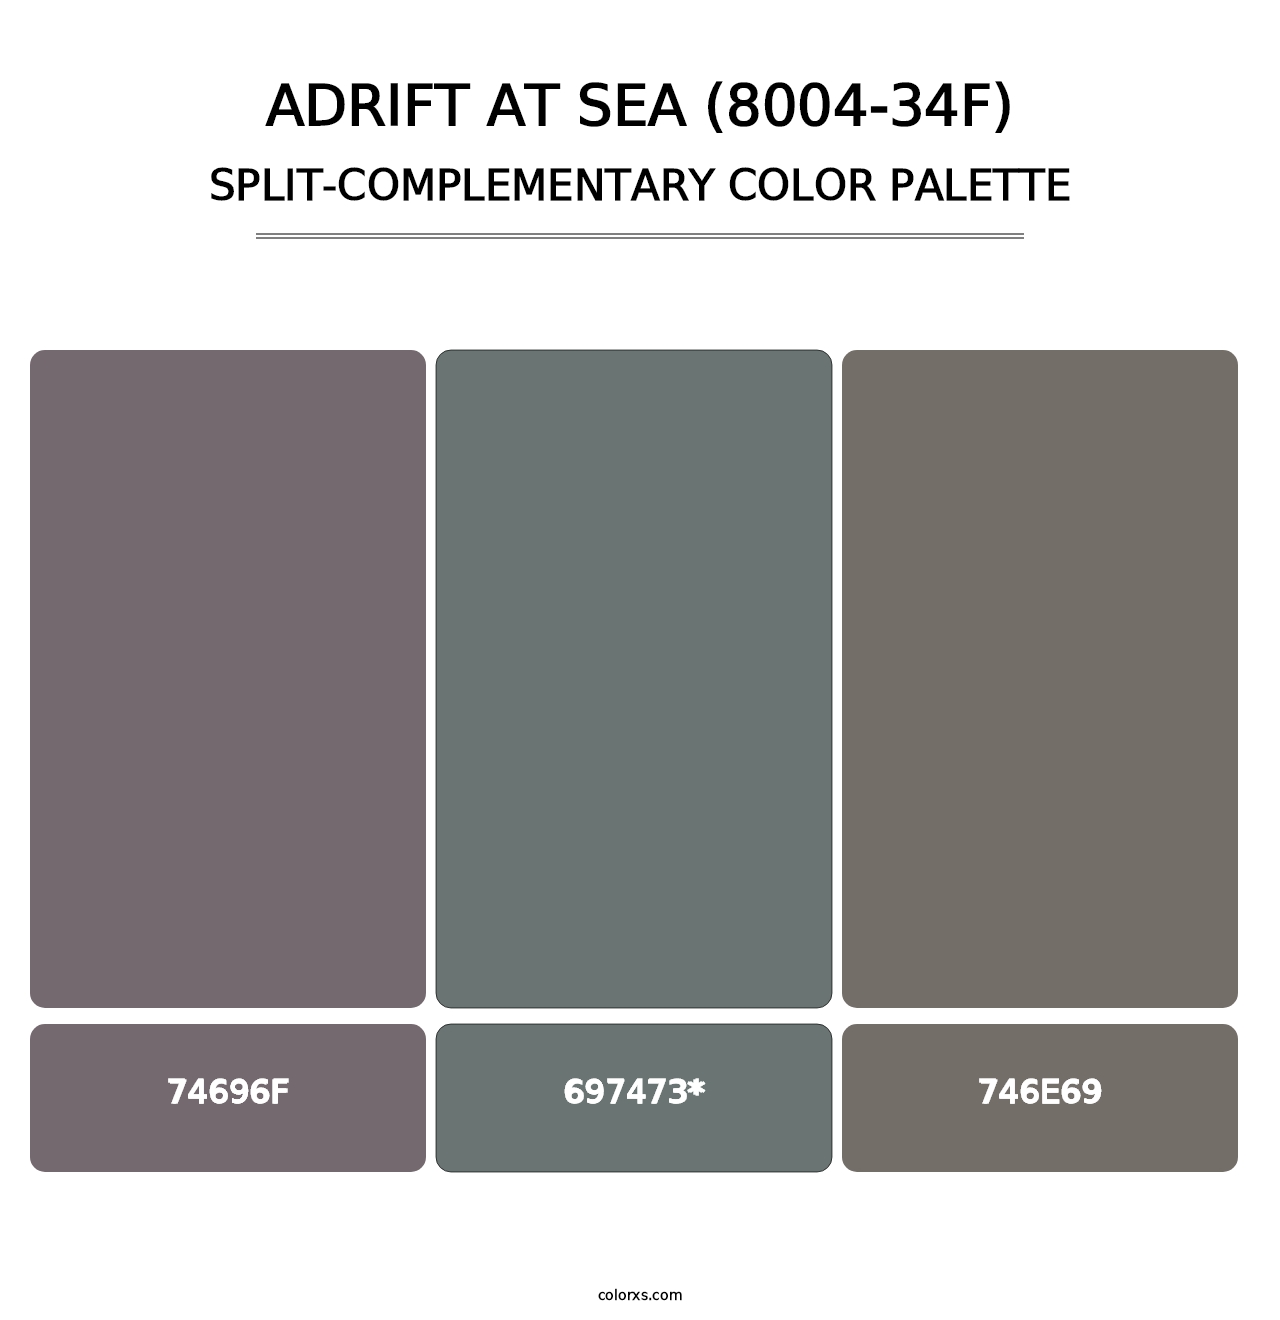 Adrift at Sea (8004-34F) - Split-Complementary Color Palette